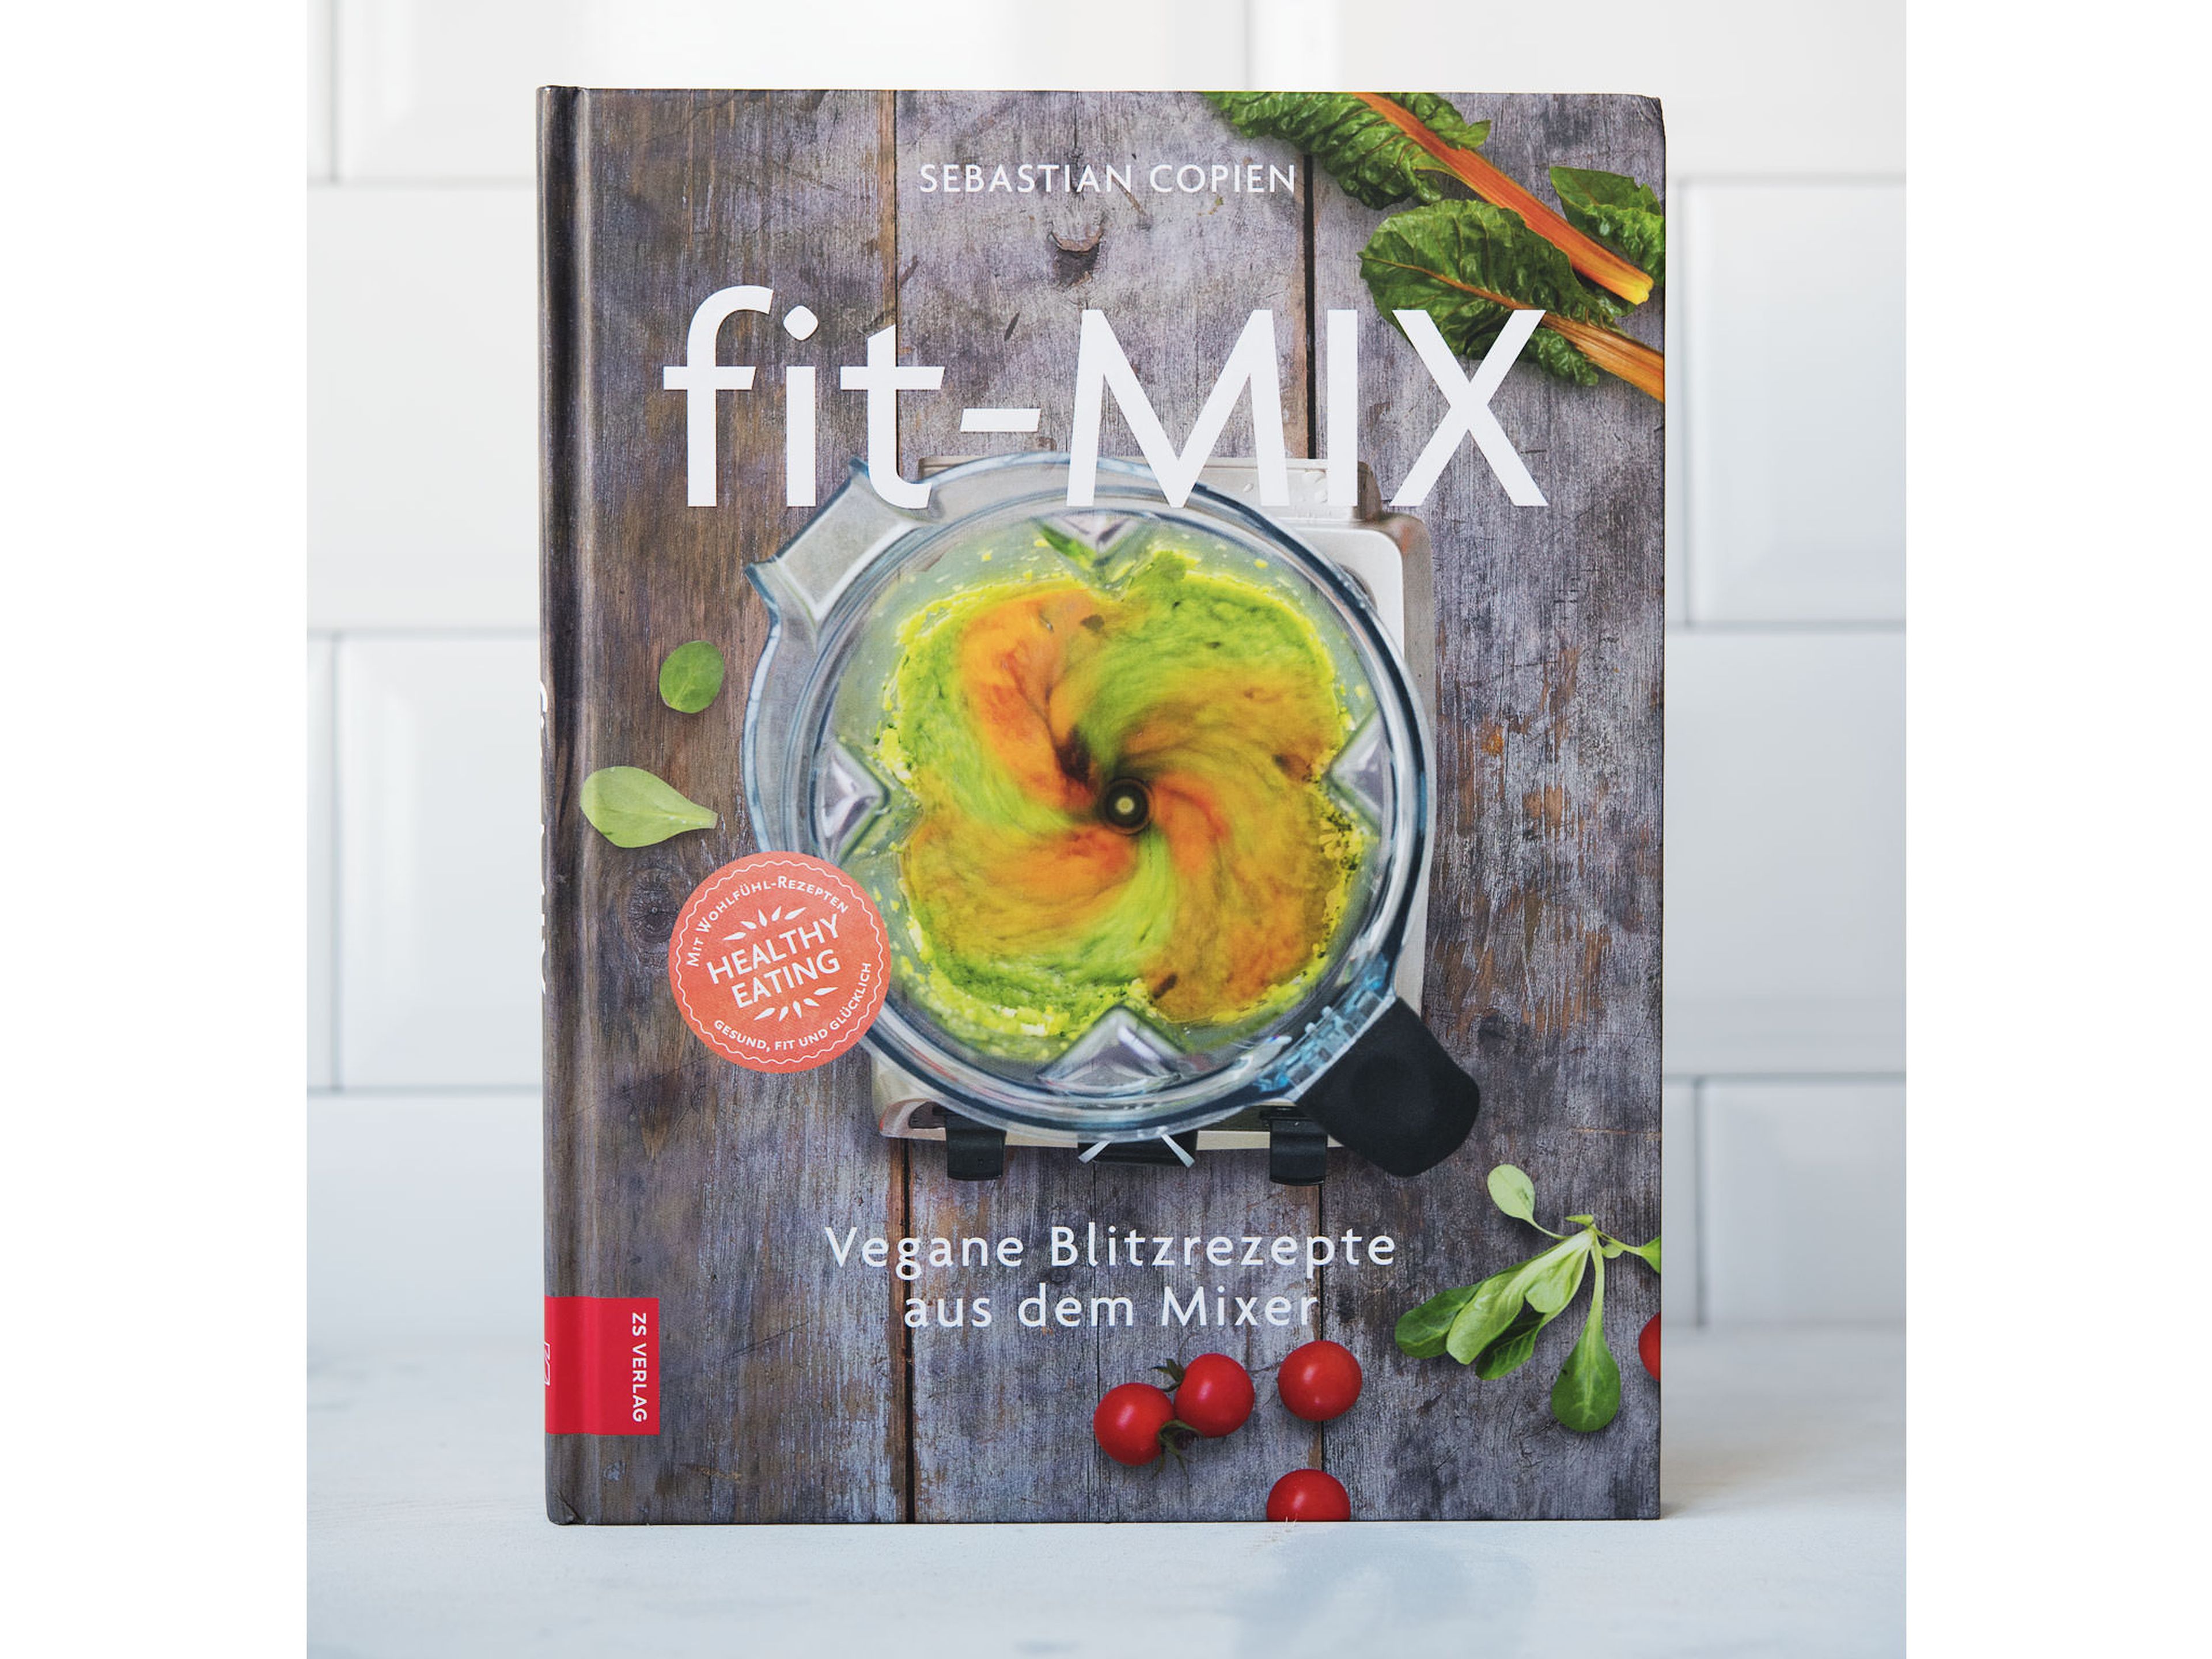 Find this recipe and more quick treats by Sebastian in his cookbook "Fit-Mix" (ZS Verlag).